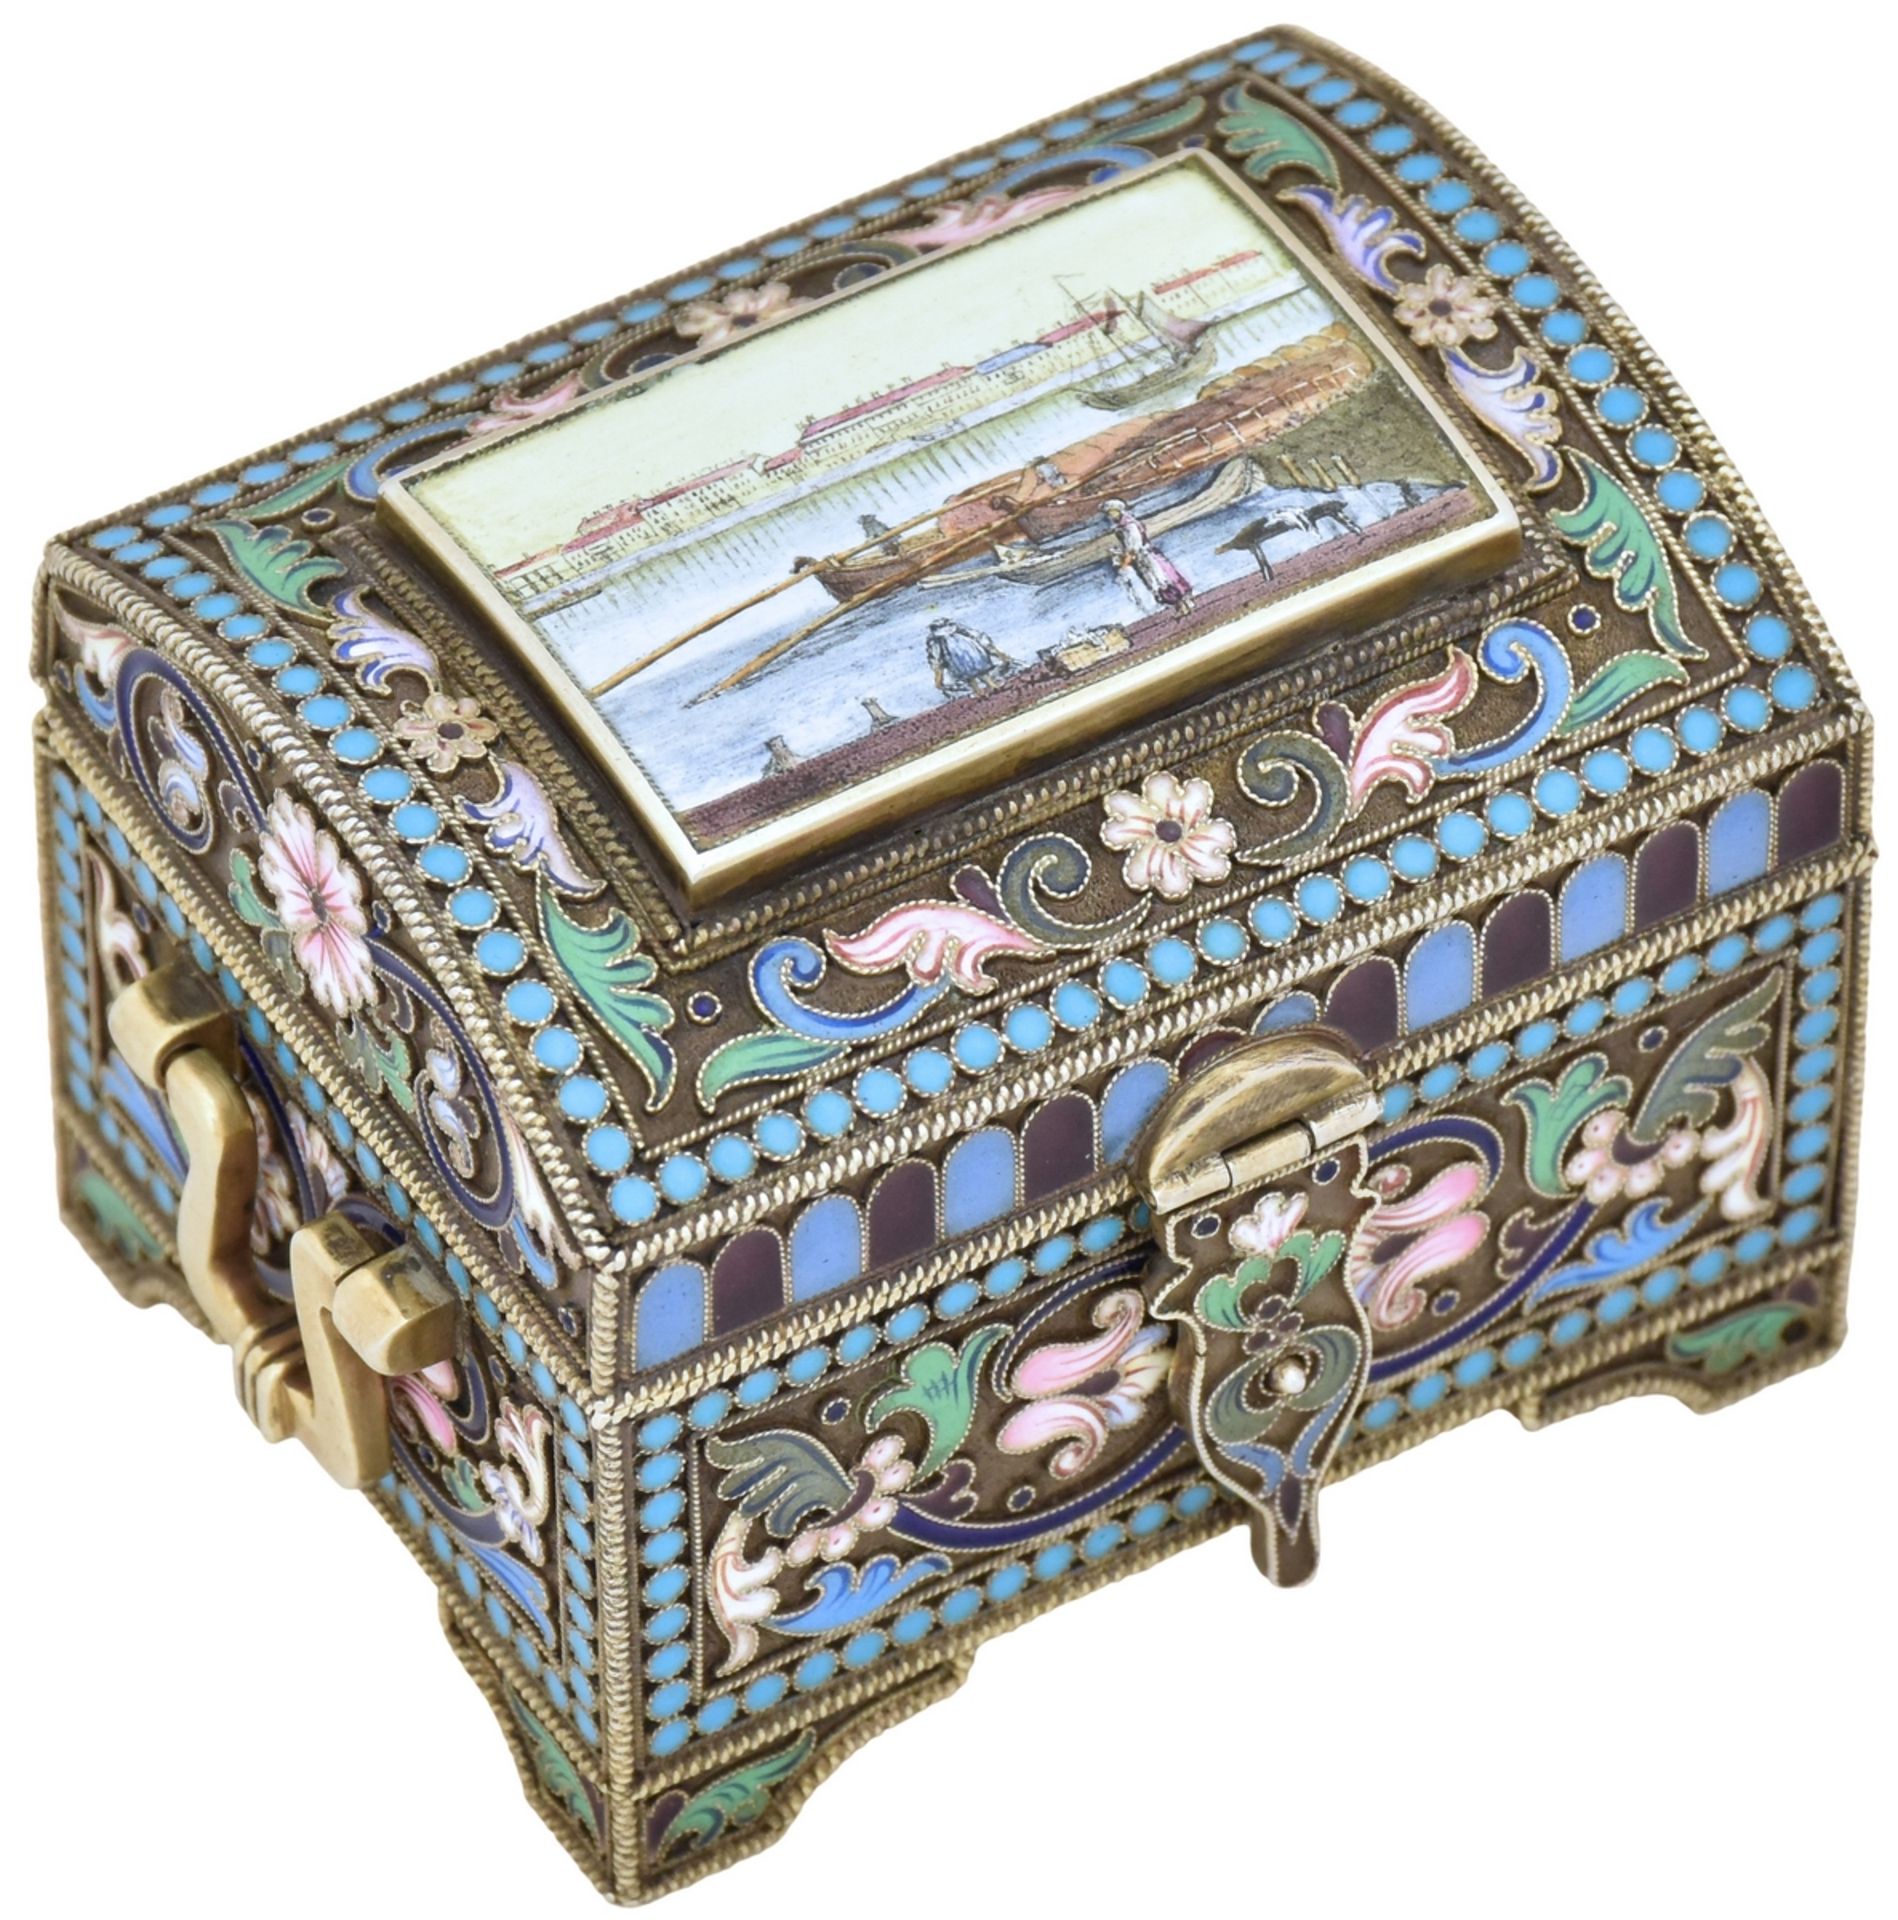 [Russian] Box a la Russe with city view on the lid. Russia. 20th century - Image 2 of 8